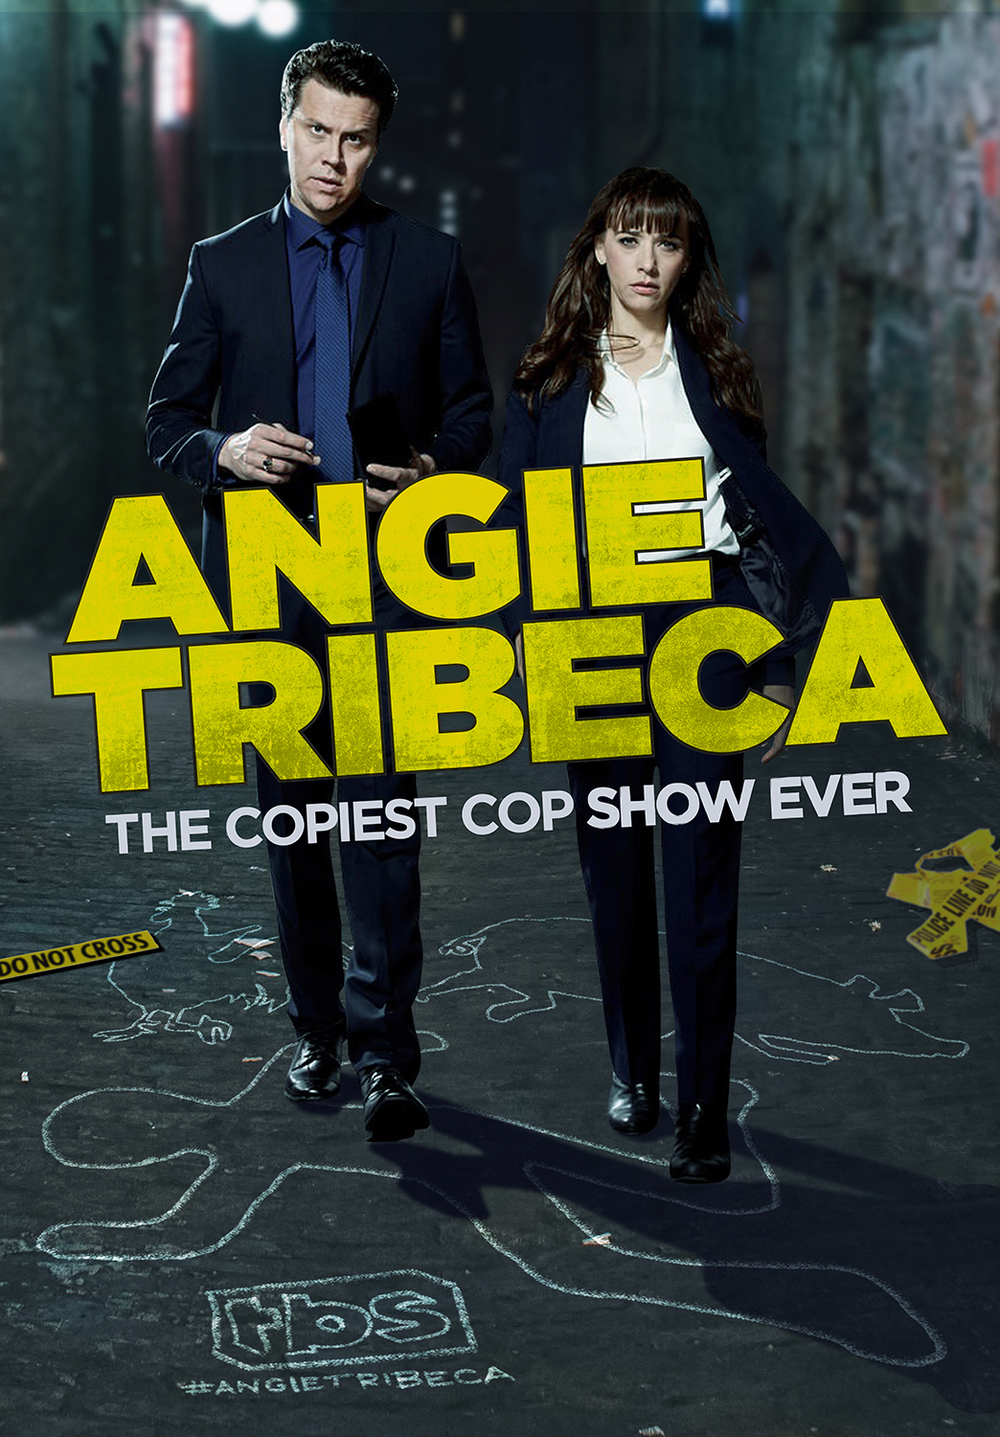 Nice wallpapers Angie Tribeca 1000x1437px